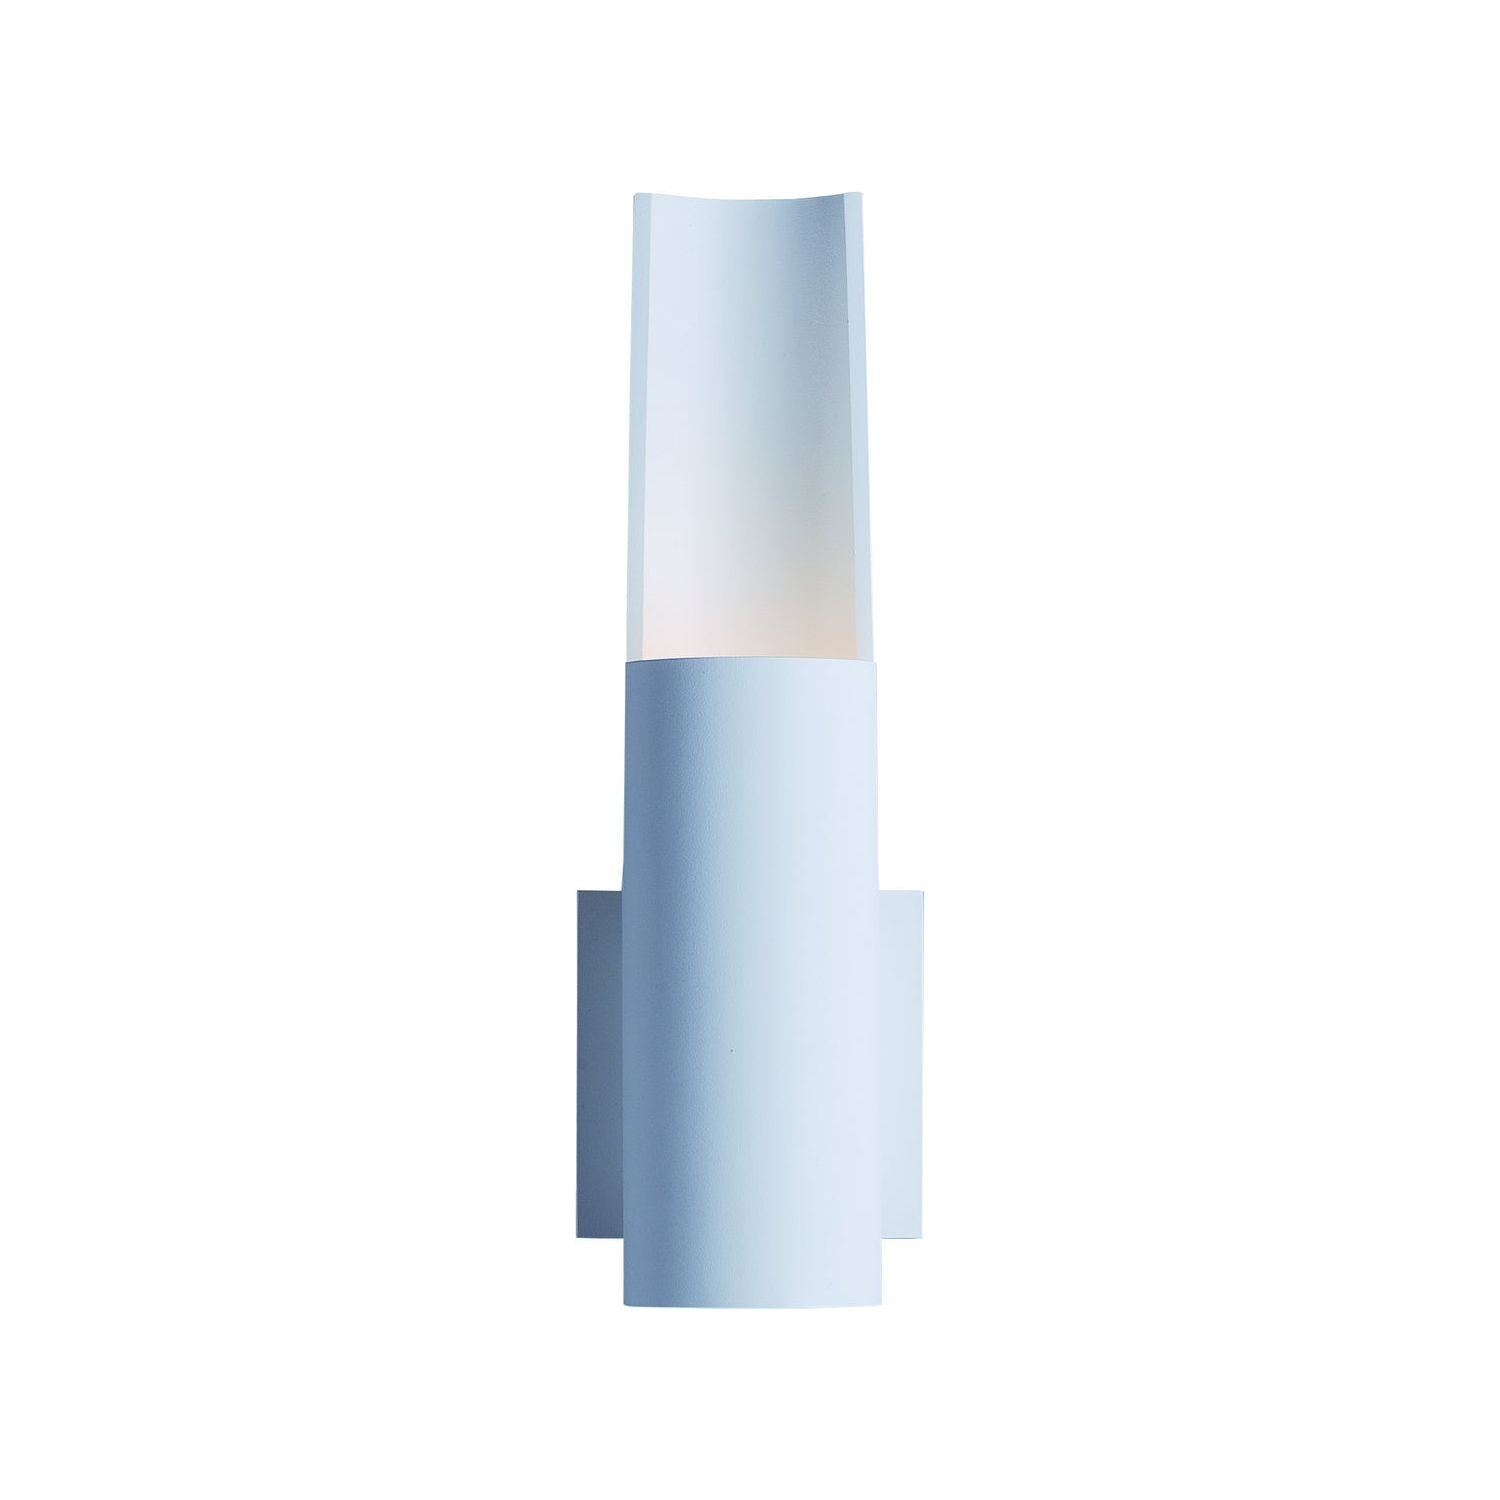 ET2 - E41524-WT - LED Outdoor Wall Sconce - Alumilux Runway - White